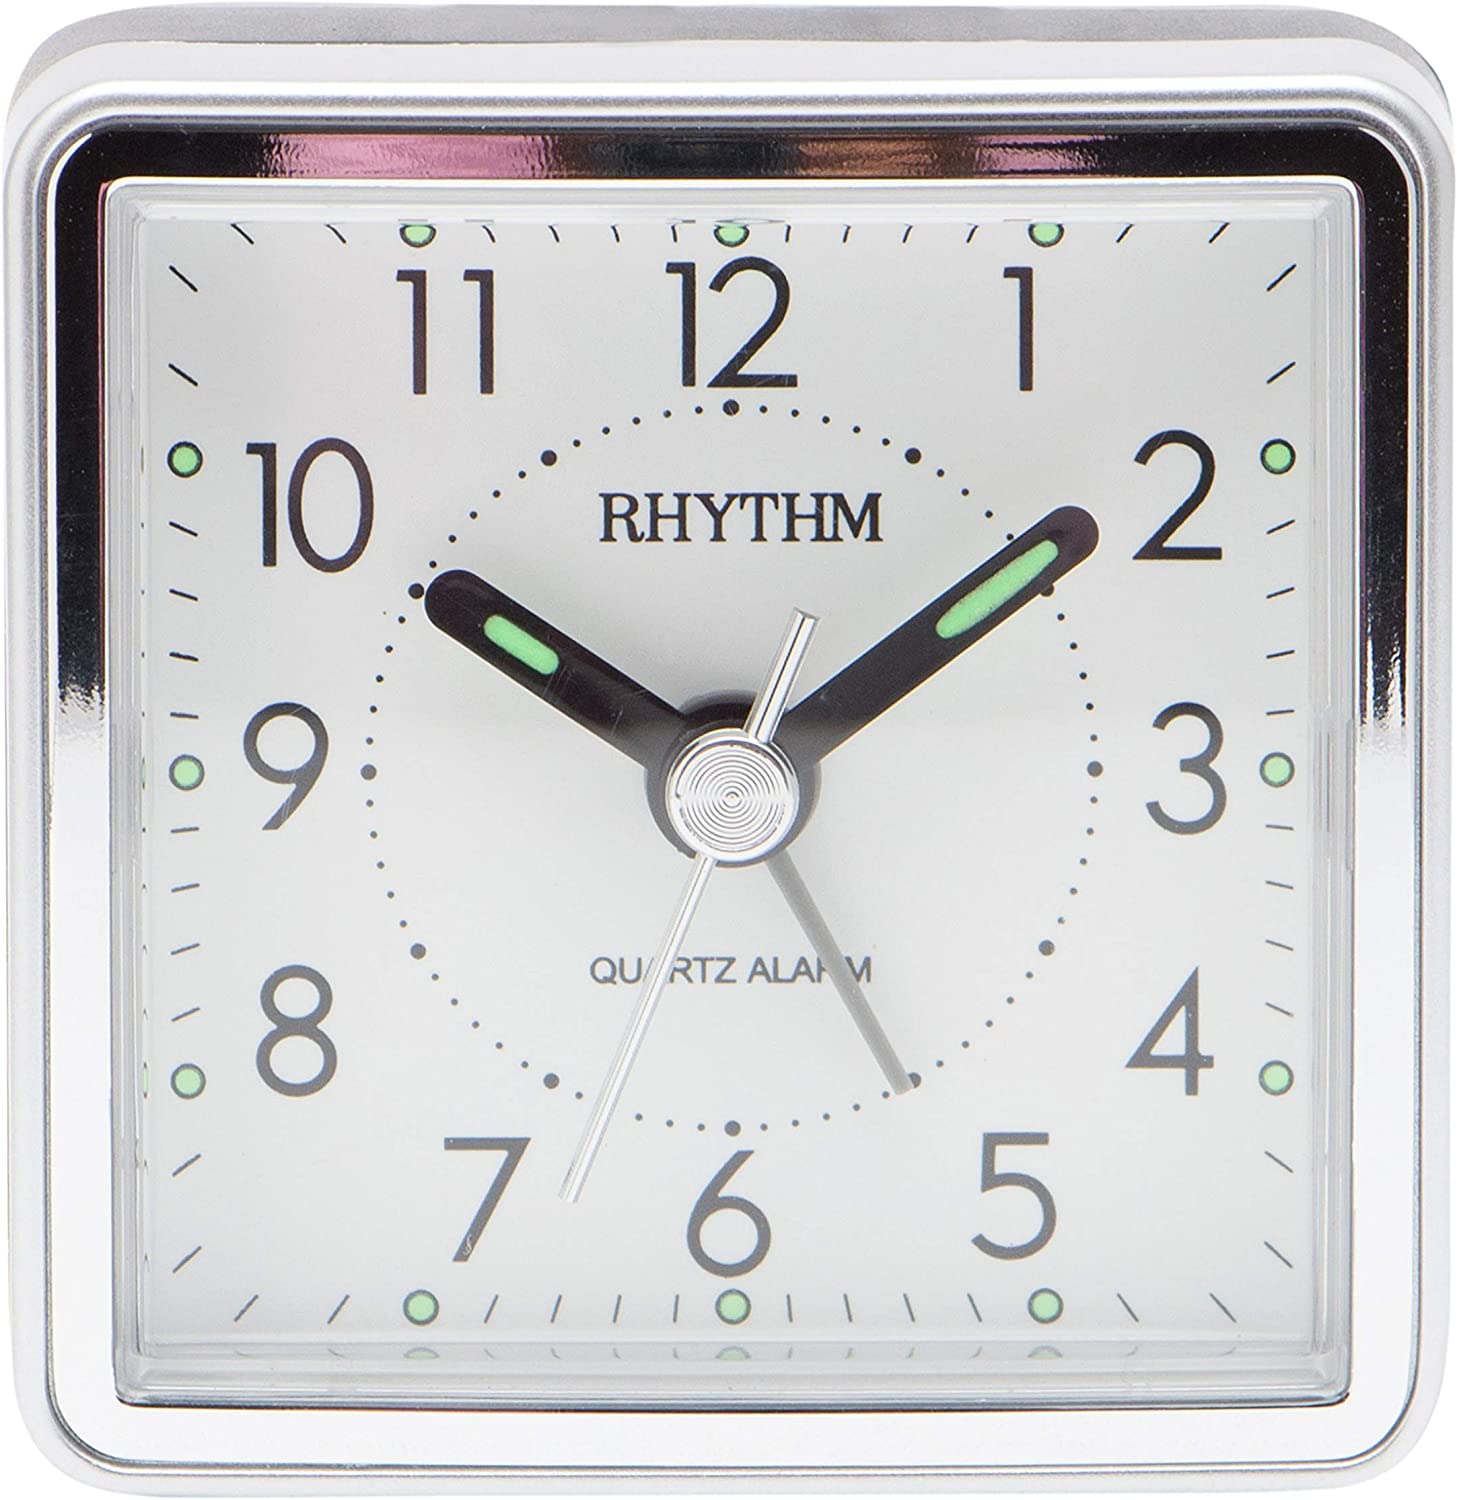 Rhythm Value Added Beep Alarm Table Clock CRE210NR19 | Reliable Timekeeping | Travel | Wake Up Routine | Snooze Function | Battery Operated | Portable | White Face | Halabh.com